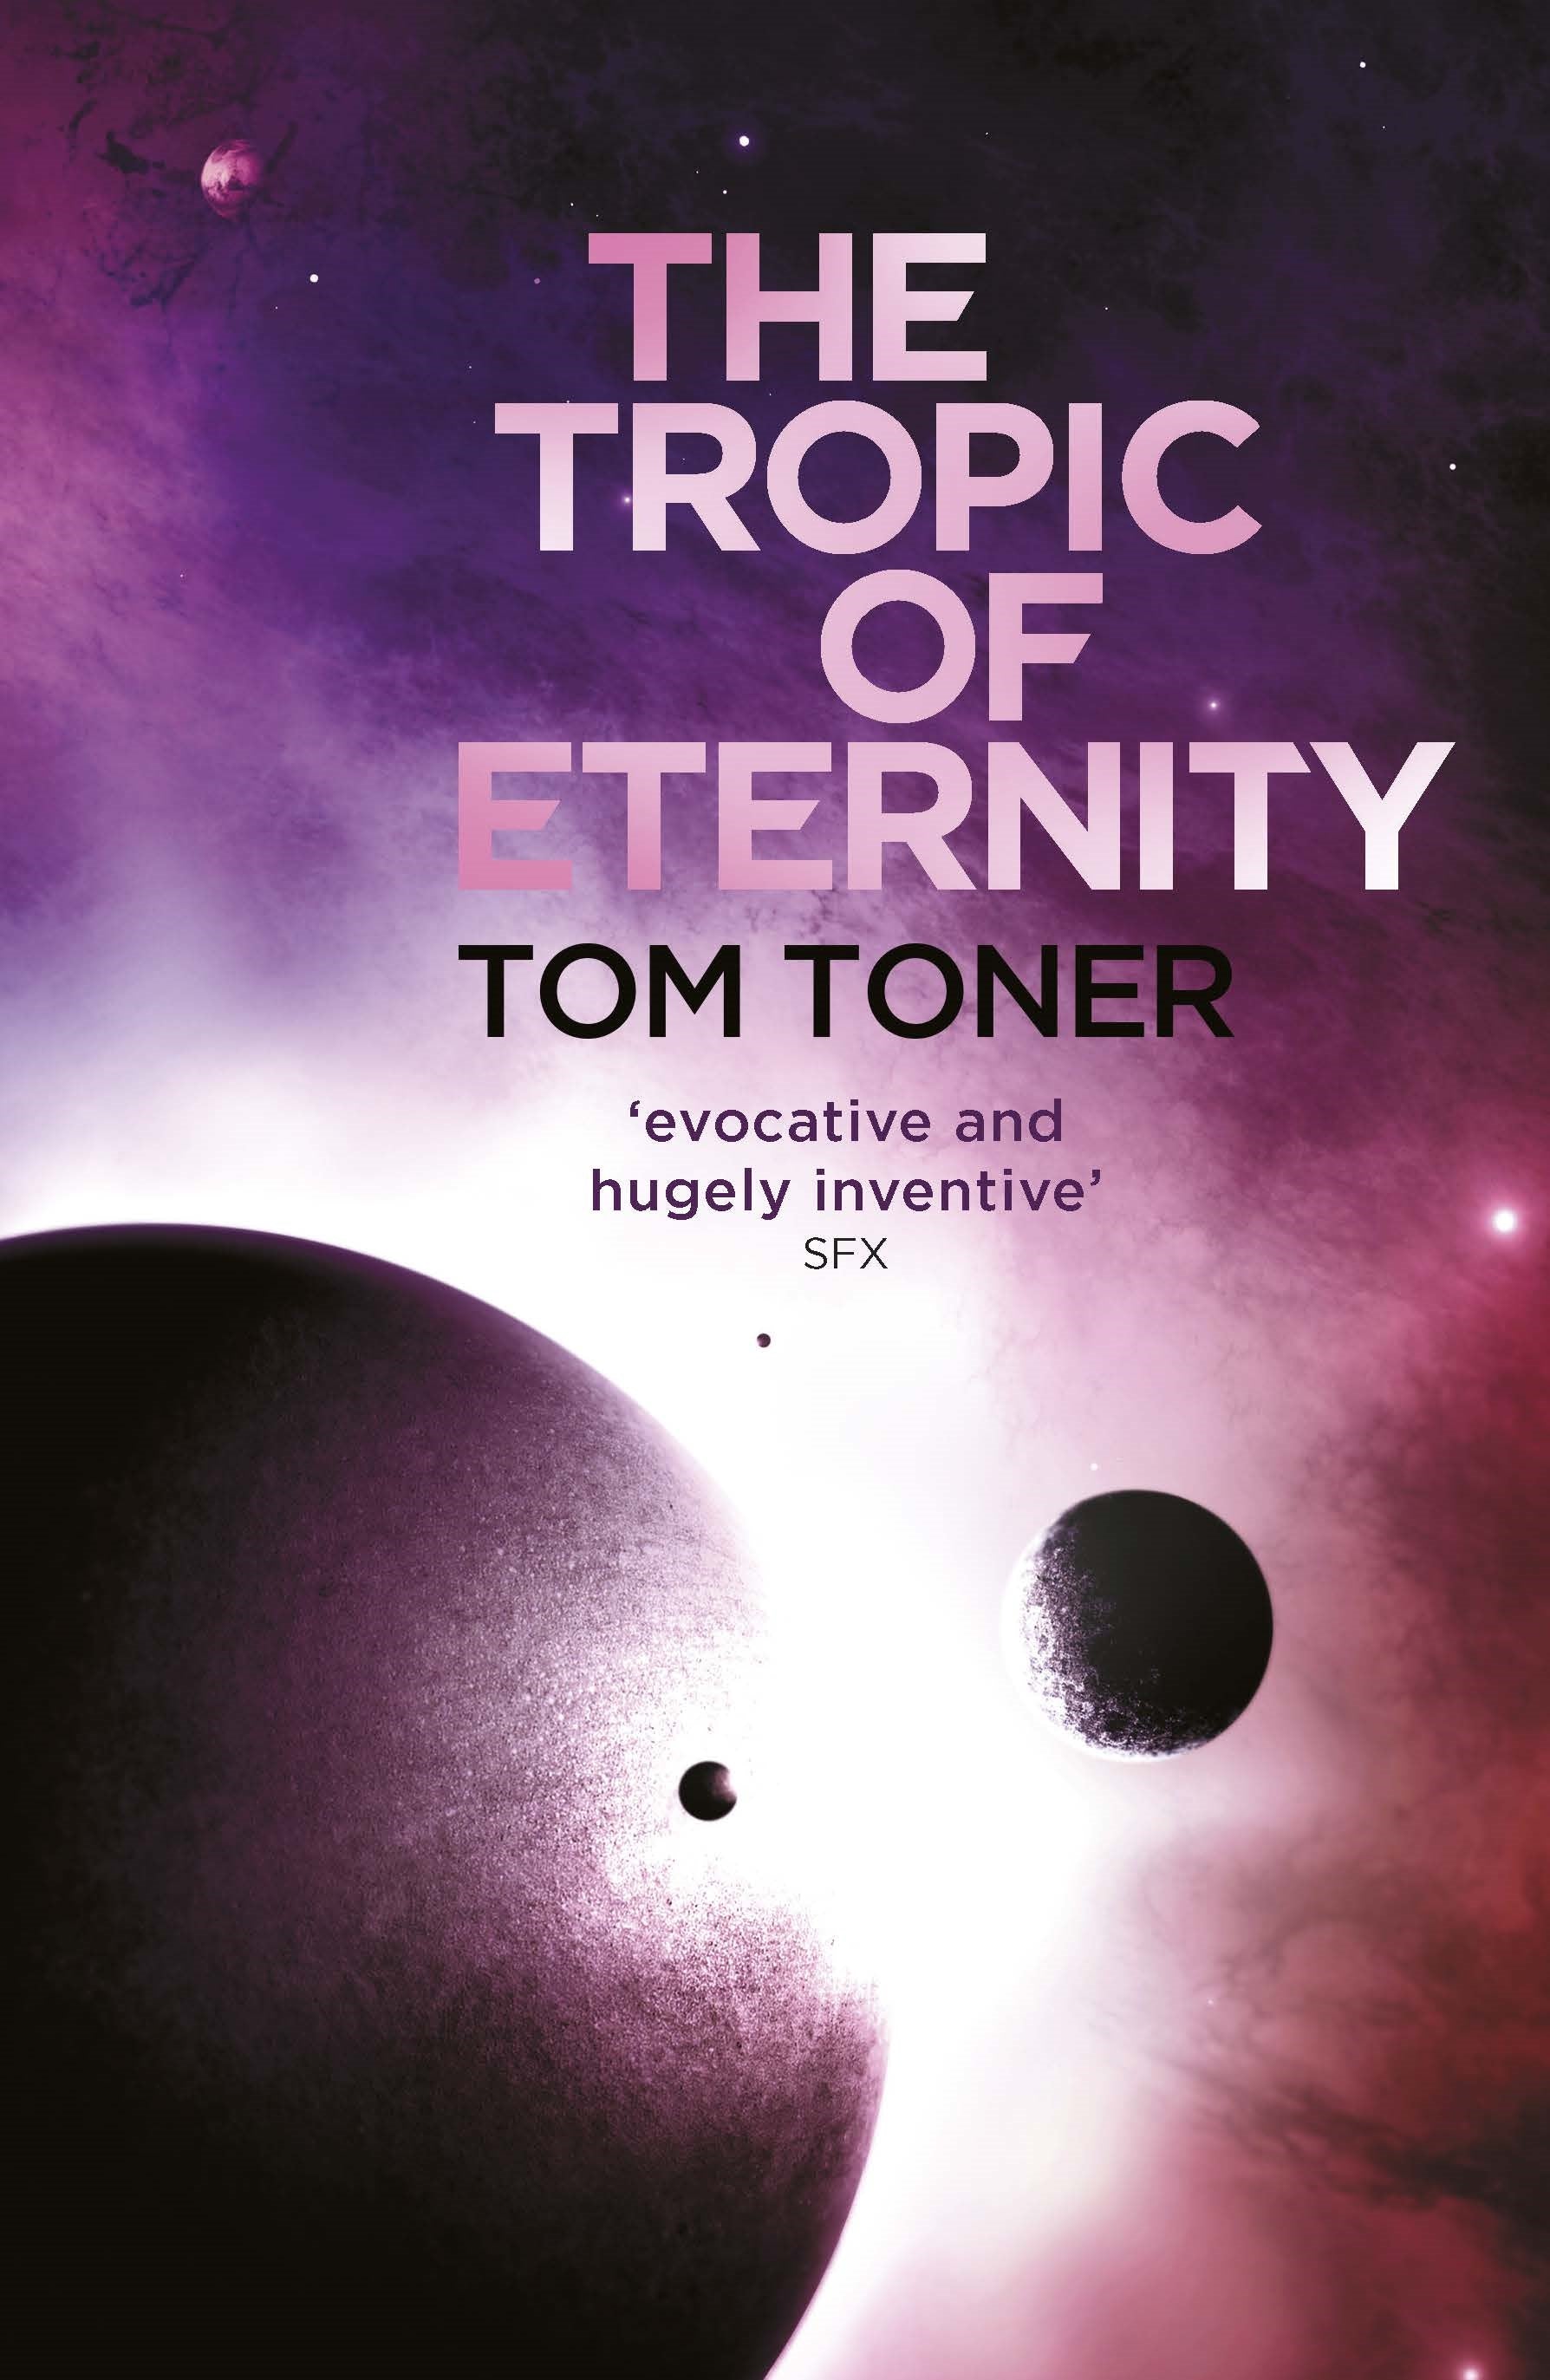 The Tropic of Eternity by Tom Toner